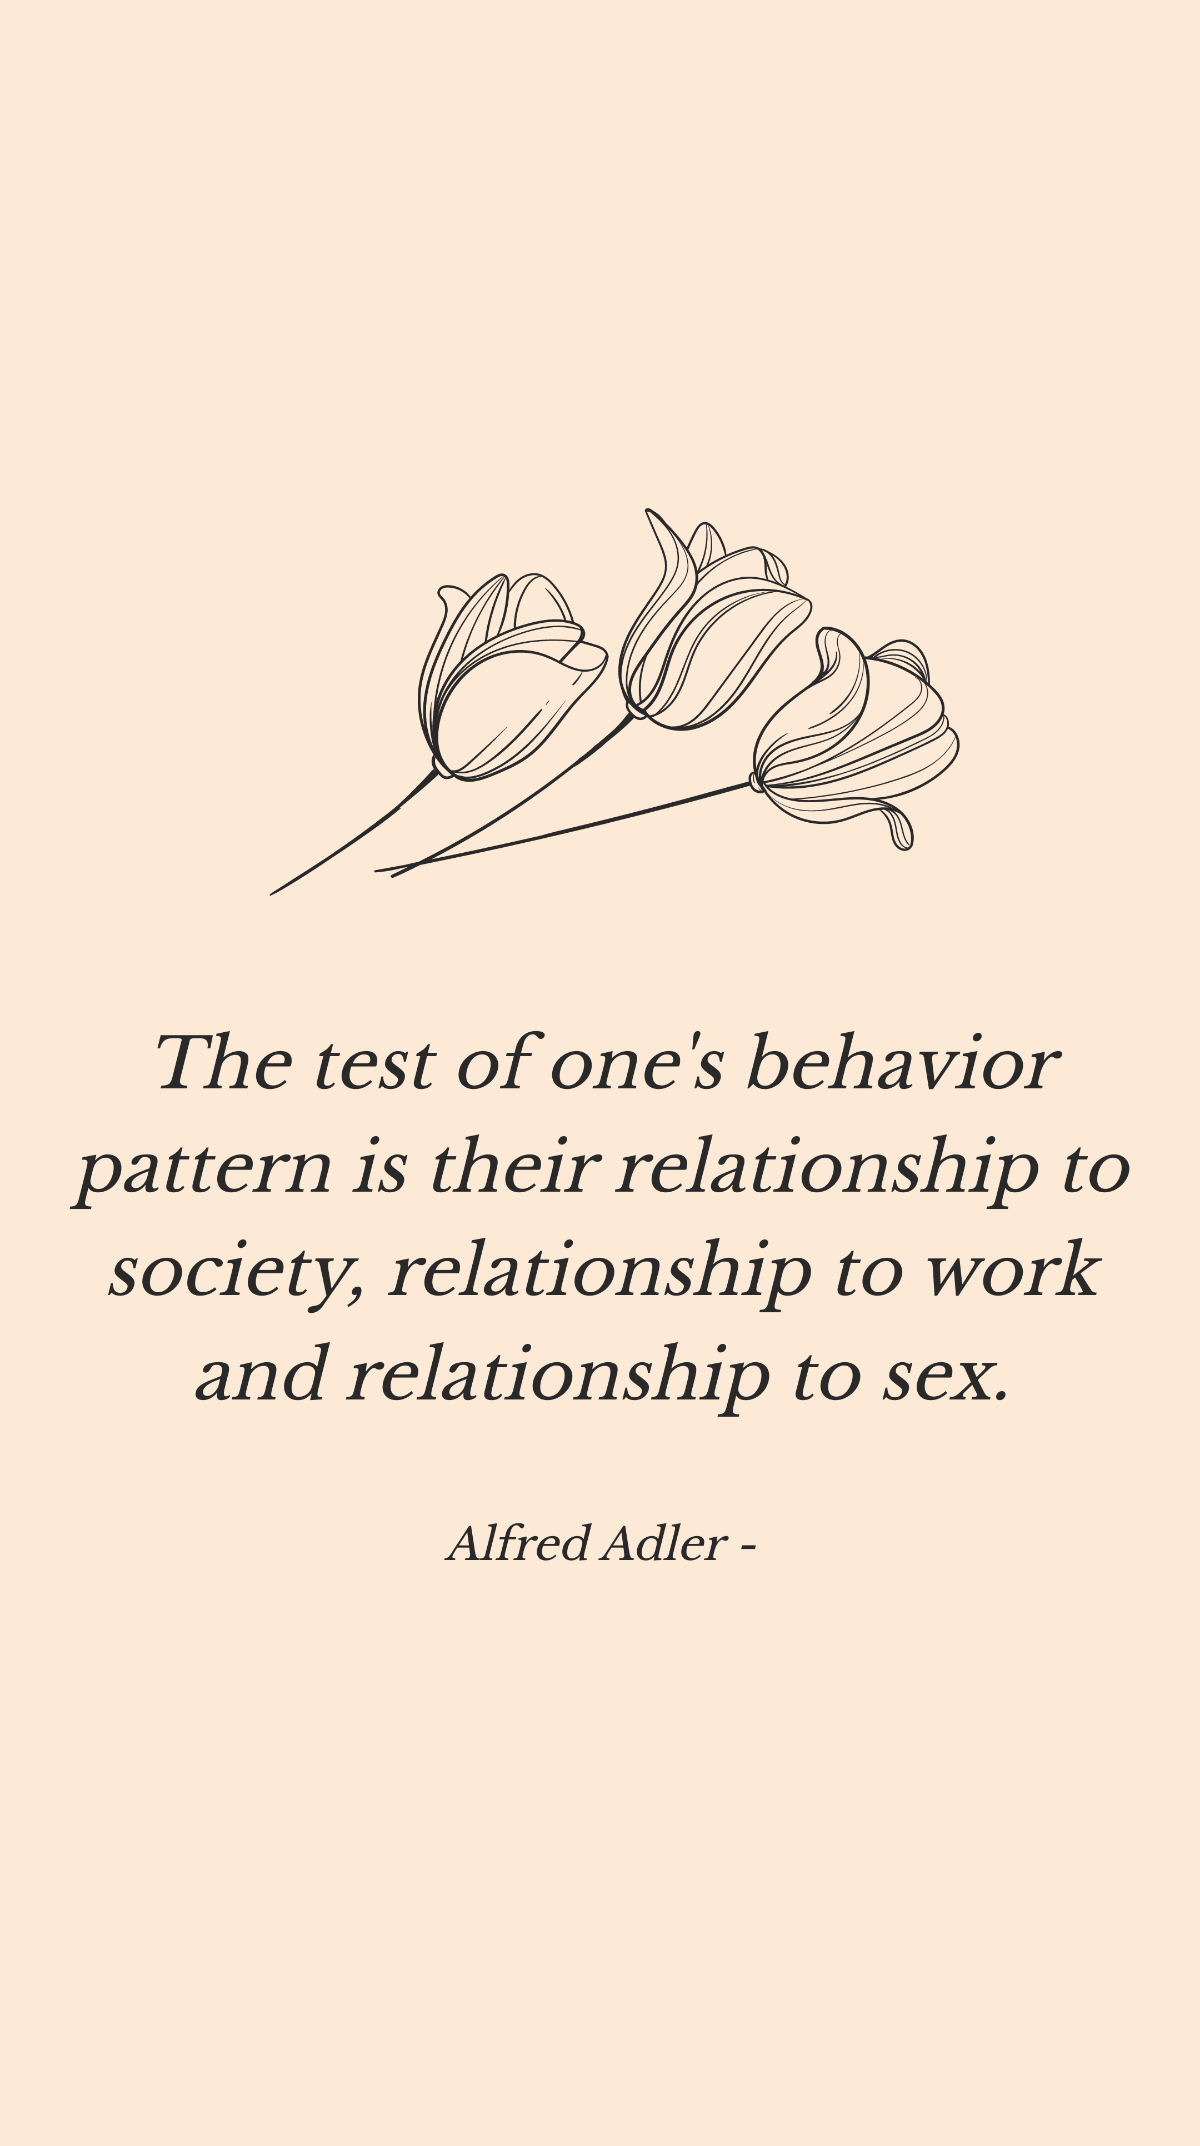 Alfred Adler - The test of one's behavior pattern is their relationship to society, relationship to work and relationship to sex. Template